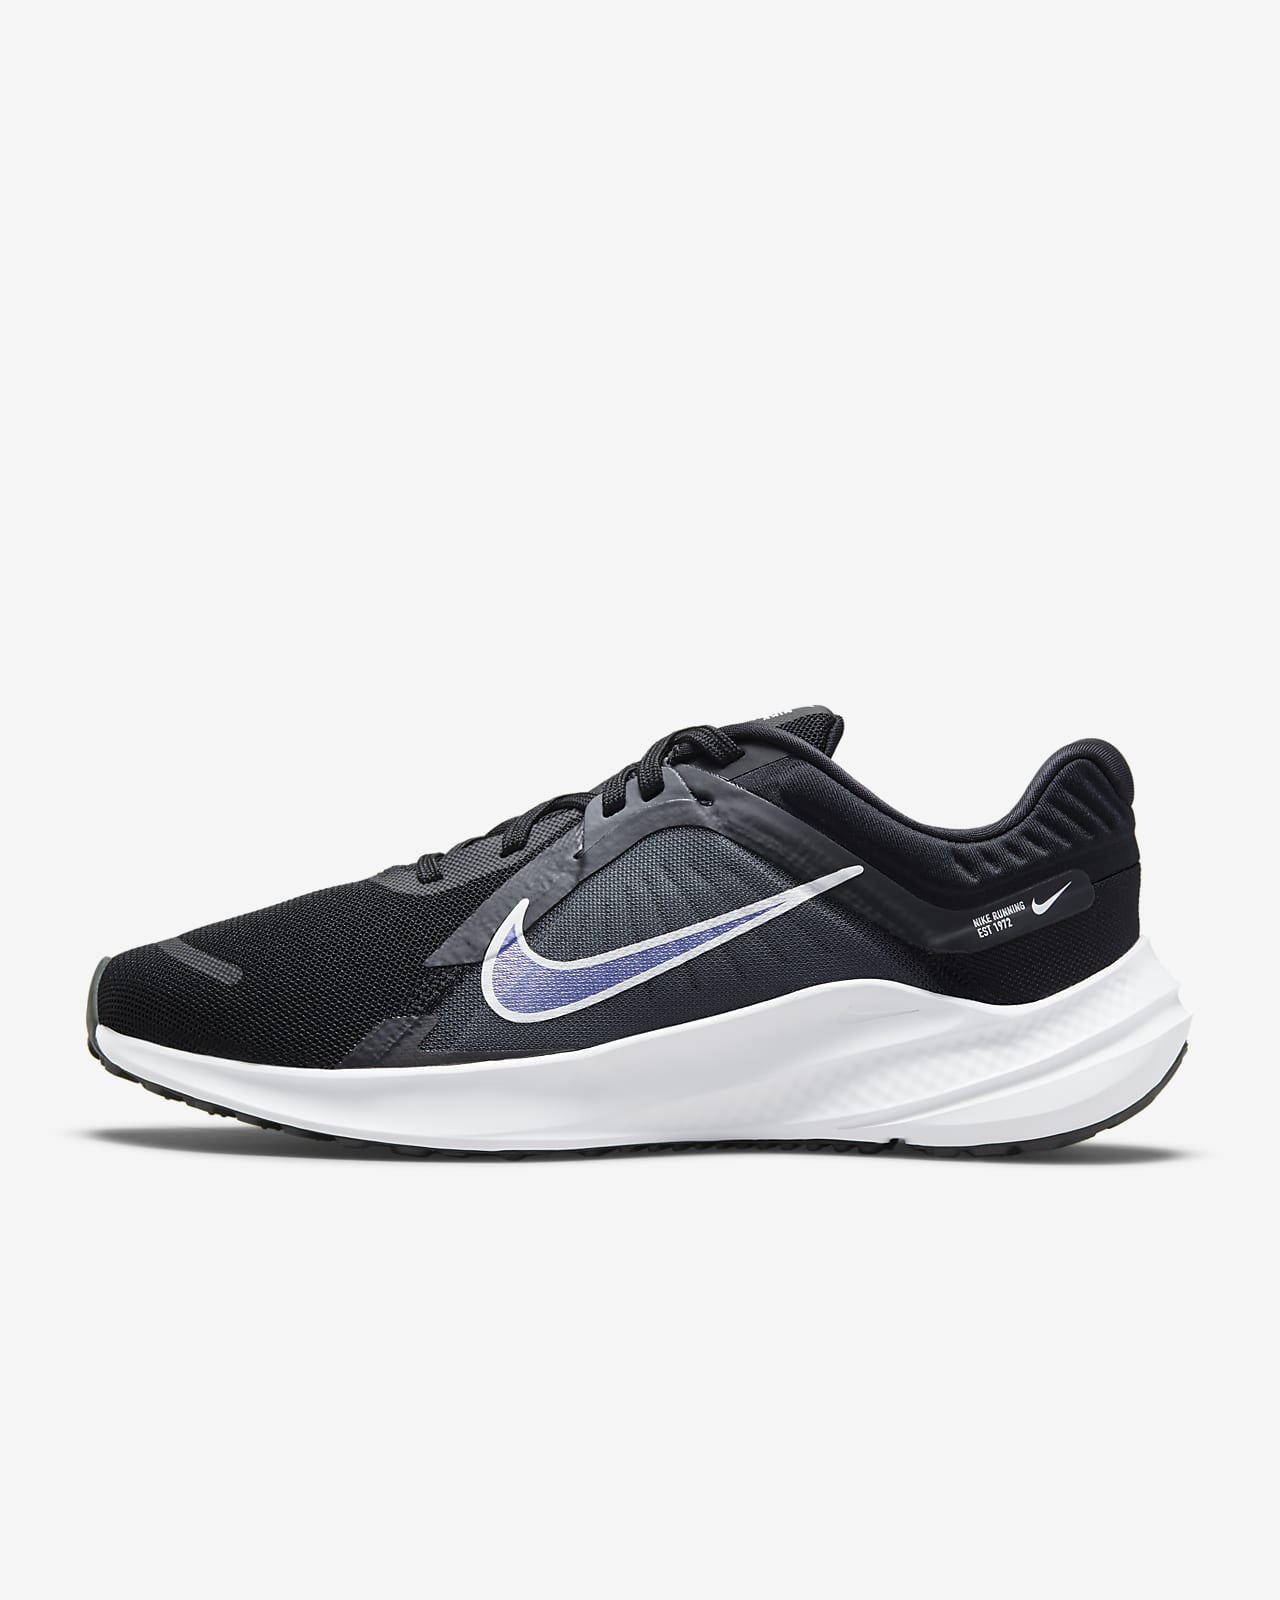 Nike Quest 5 Road Running Shoes.